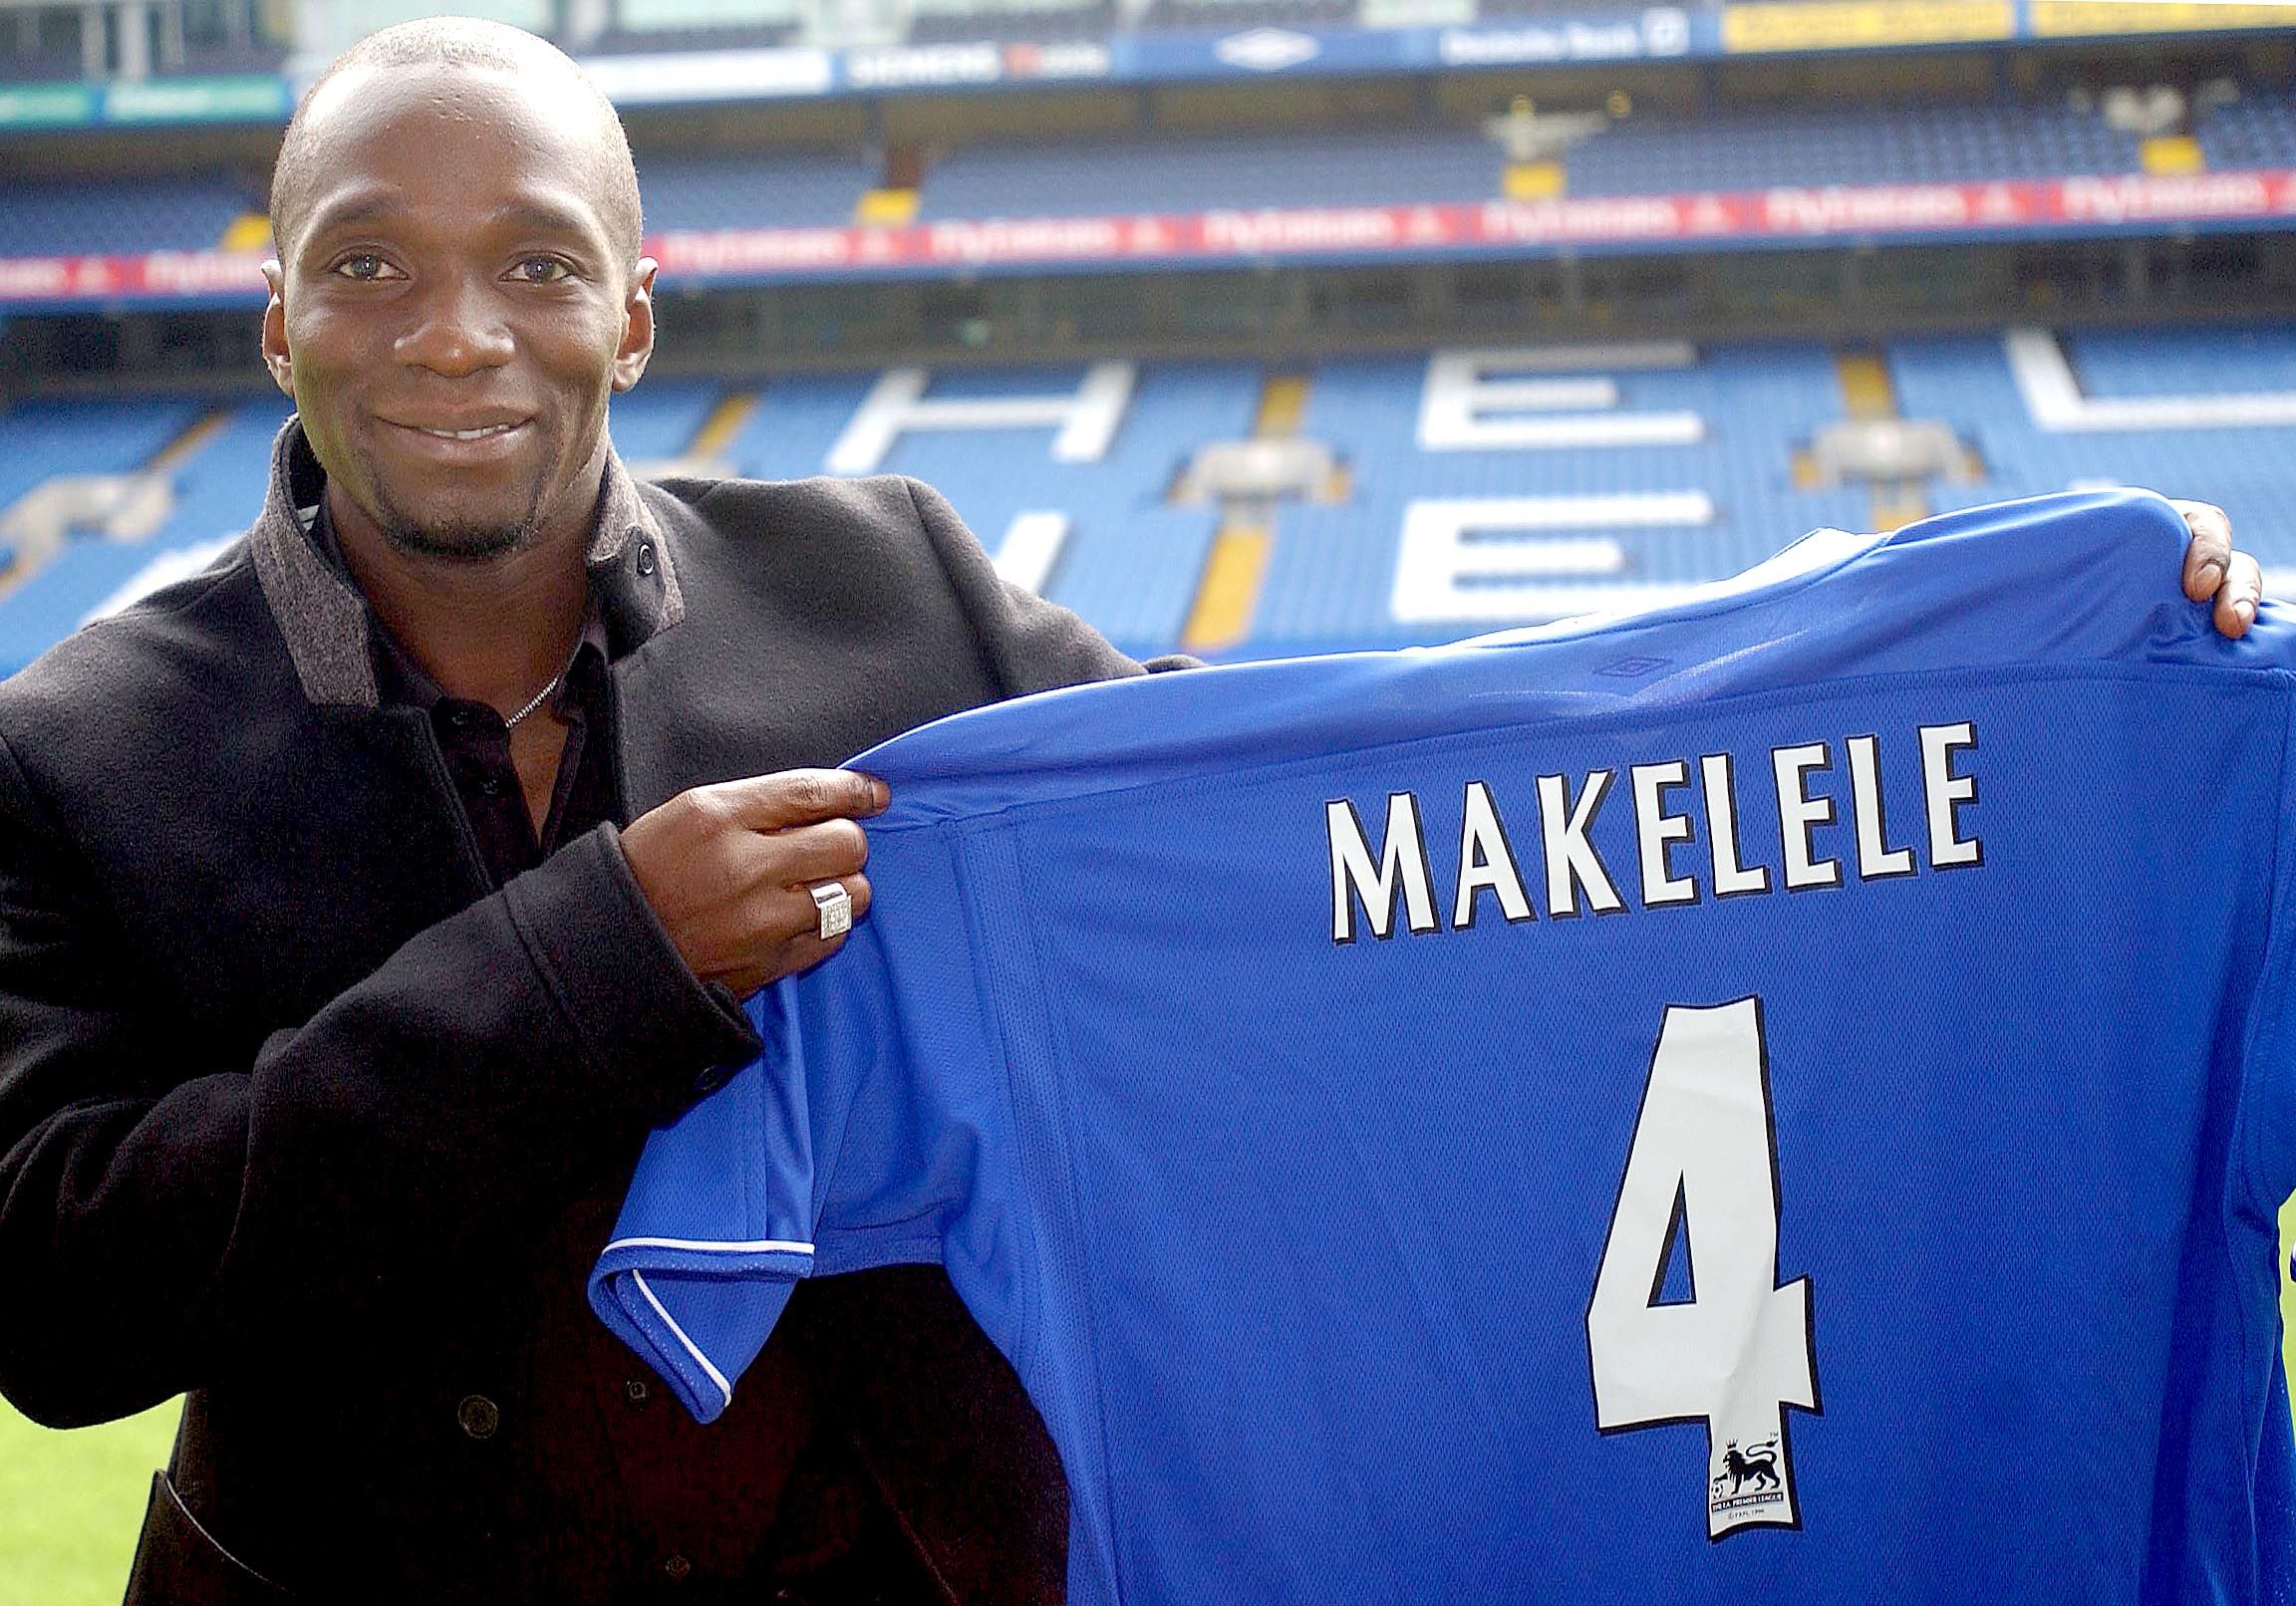 Chelsea Football Club's new French midfielder Claude Makelele holds his
new shirt at his unveiling at Stamford Bridge, London, September, 12,
2003. The French international was signed from Spanish club Real Madrid
for 16 million pounds ($25, 529, 600) as part of the massive cash
injection Chelsea's new Russian owner Roman Abramovich has given the
club. REUTERS/David Bebber

DB/MD/MA